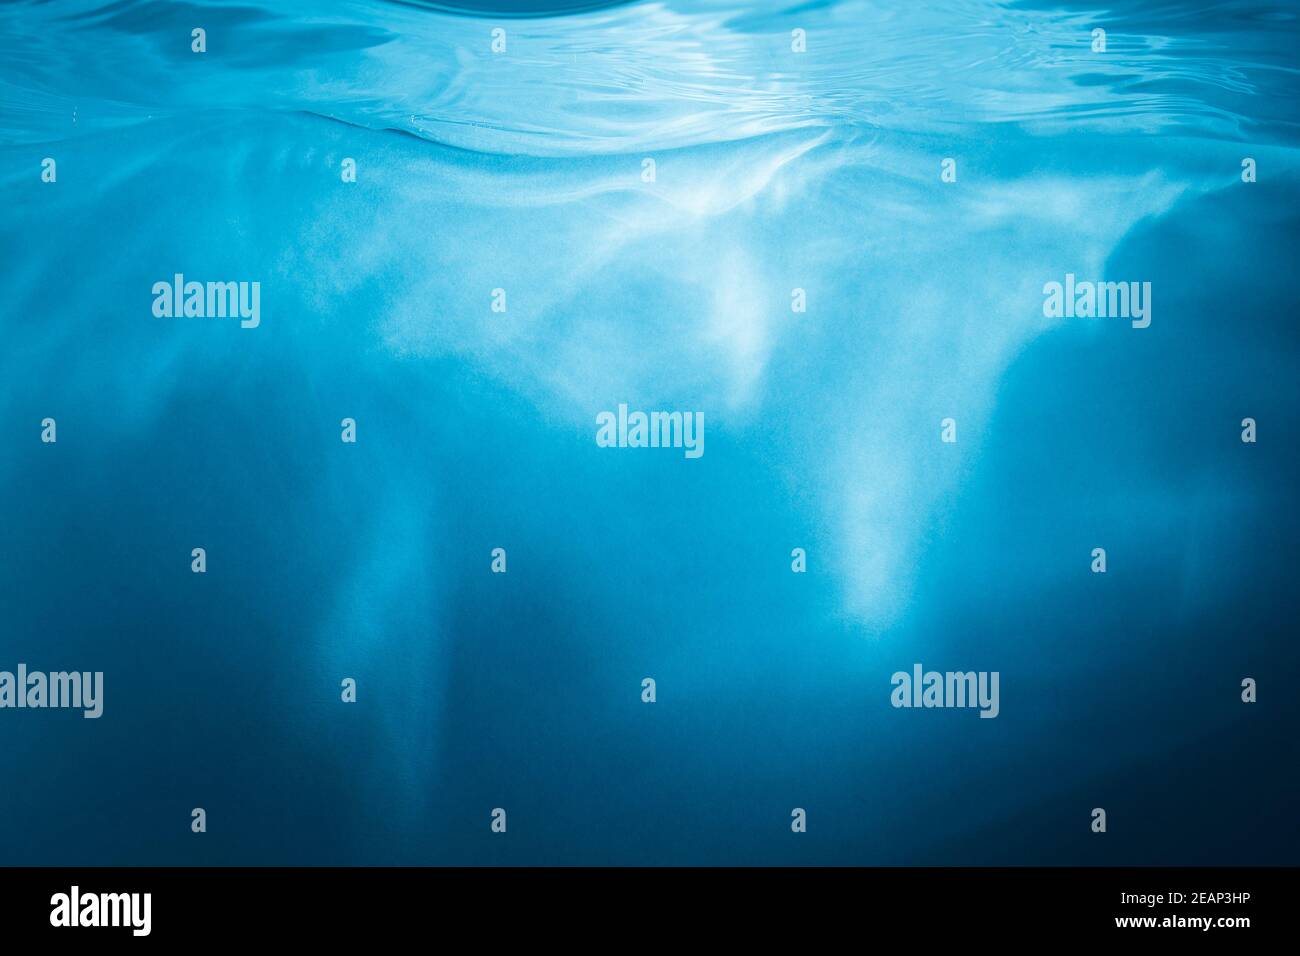 Abstract blue background. Water with sunbeams Stock Photo